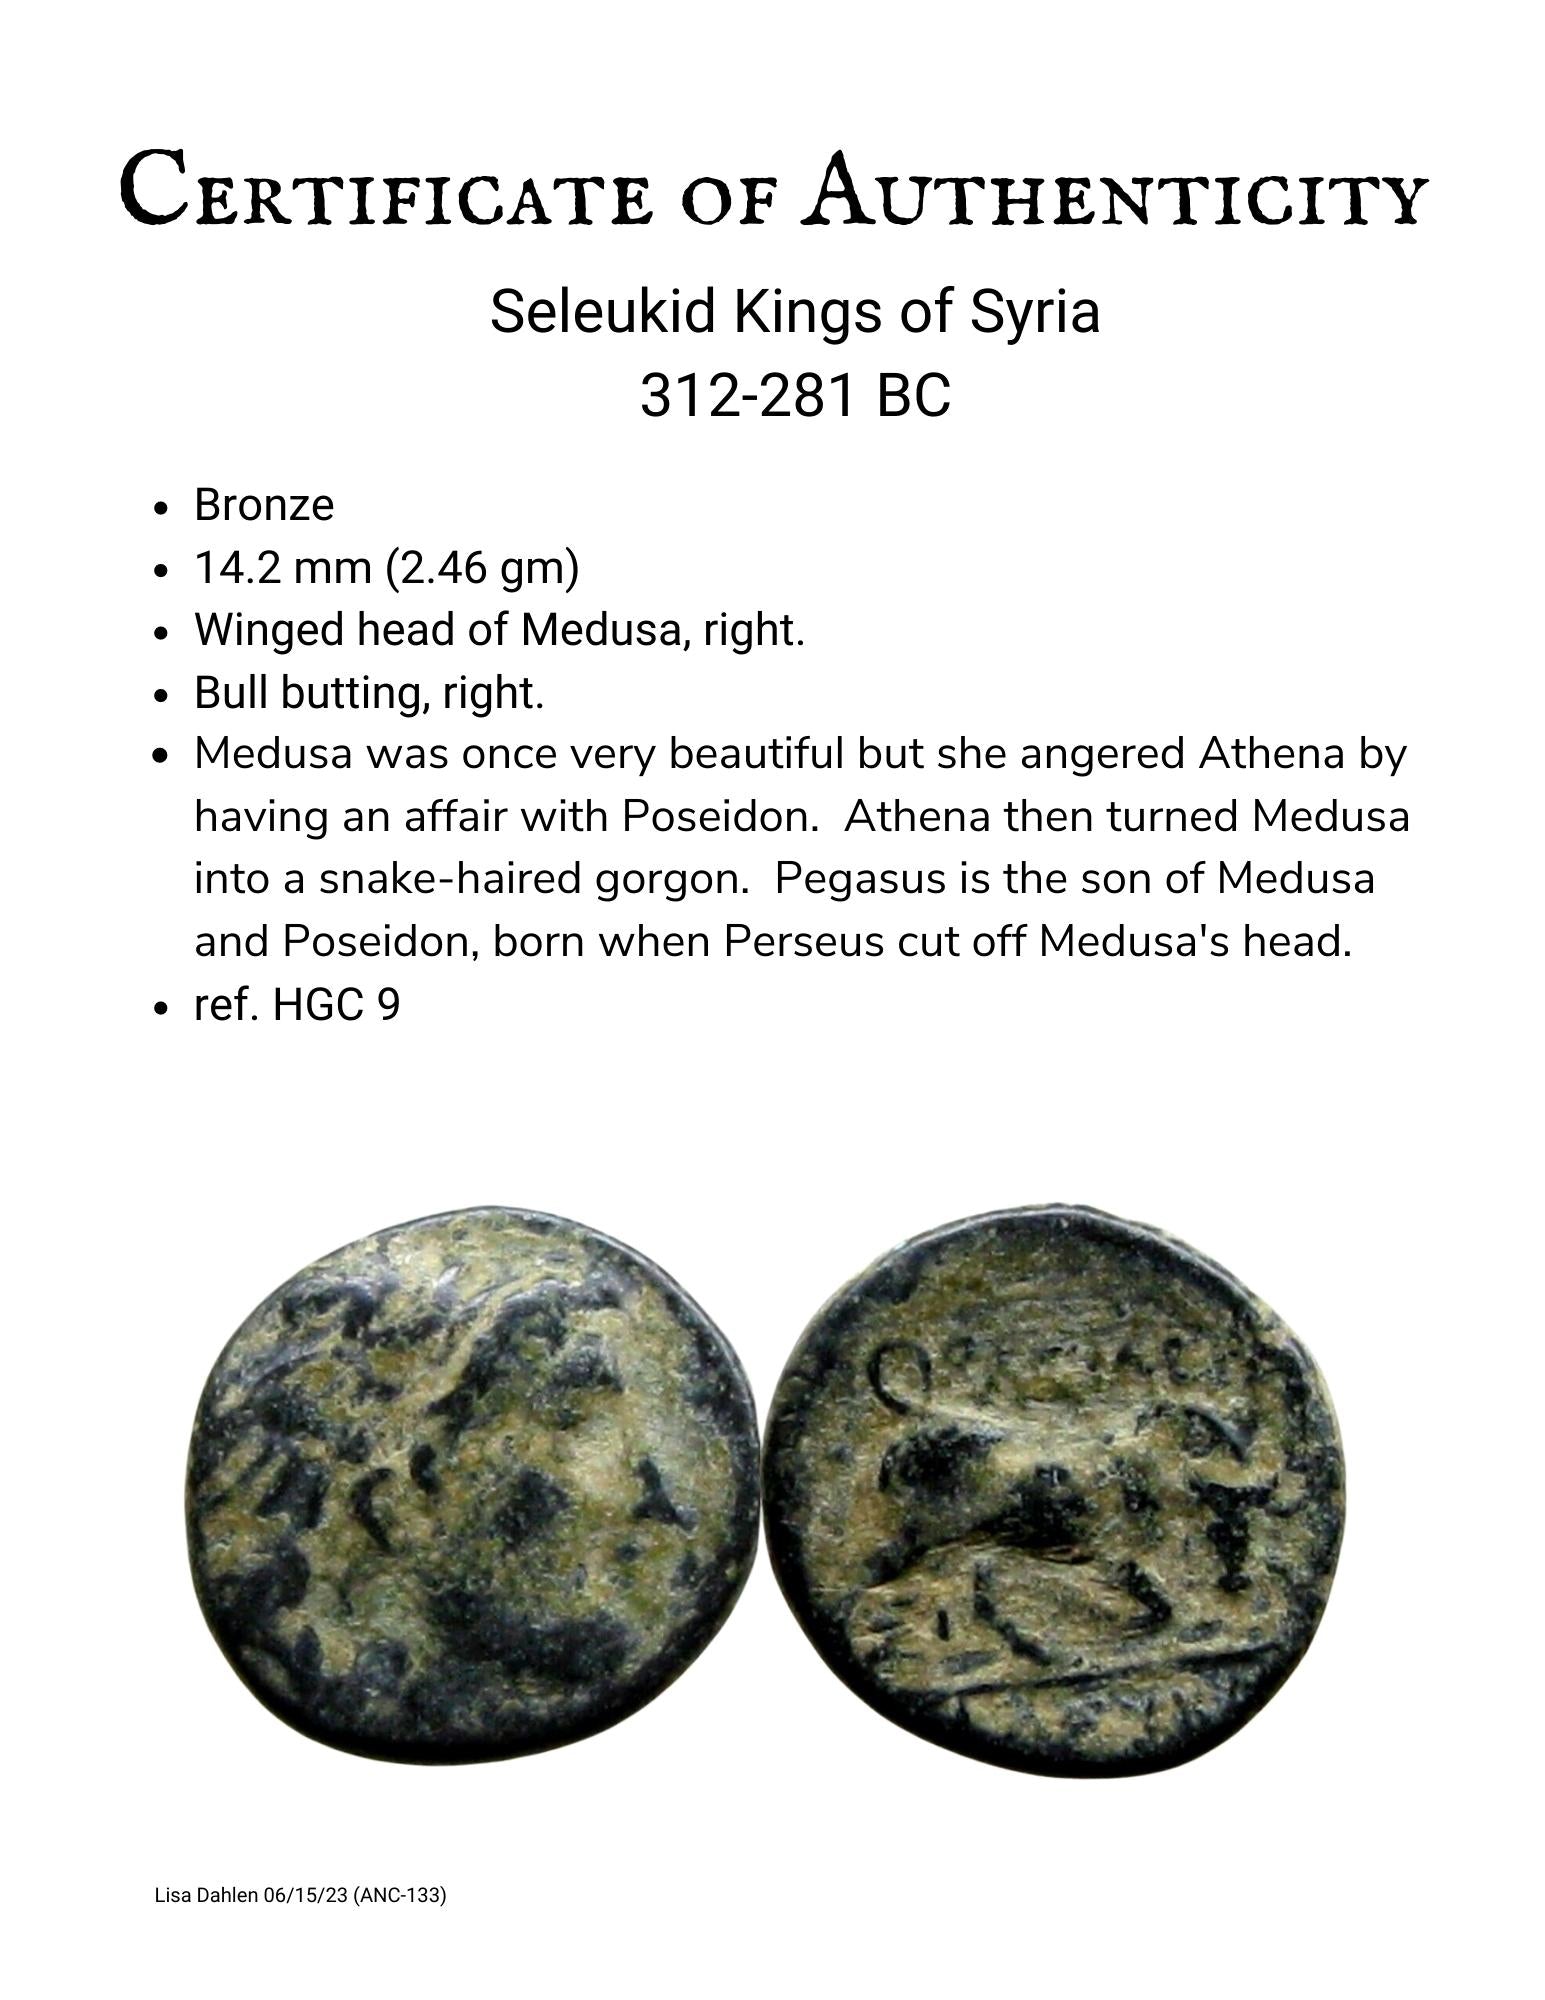 Certificate of authenticity of ancient Greek bronze coin from Seleukid Kings 312-281 BC Head of Medusa and Bull 